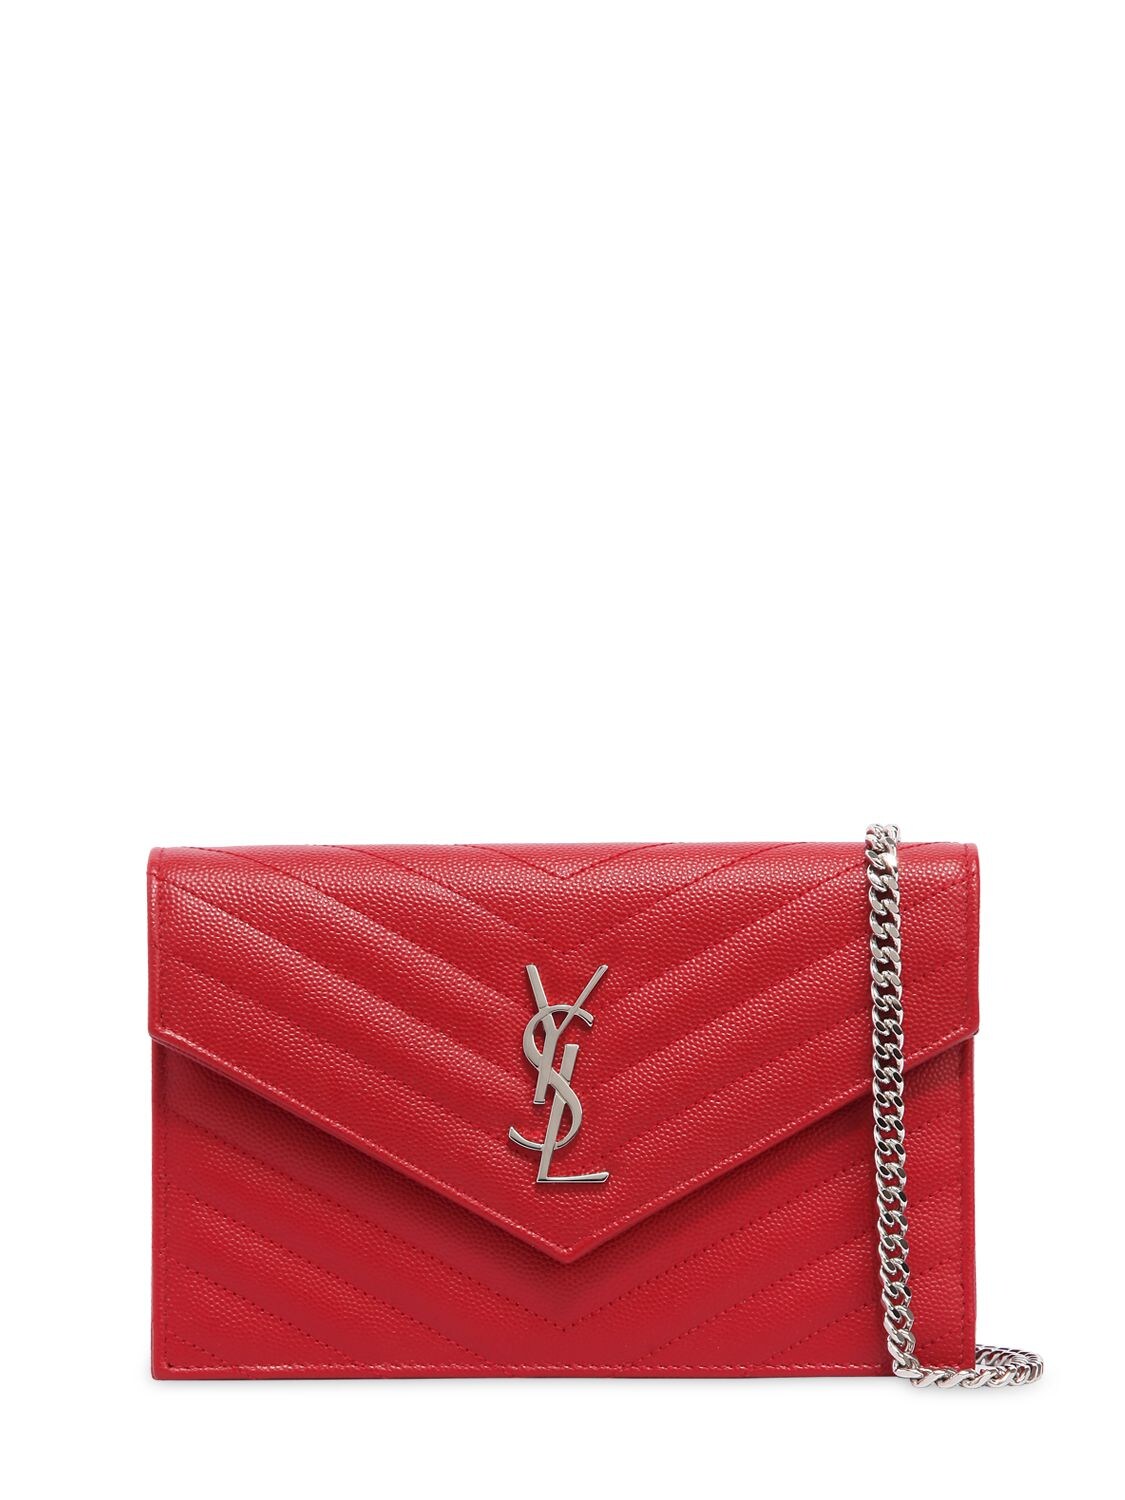 Saint Laurent Small Quilted Monogram Leather Bag In Red